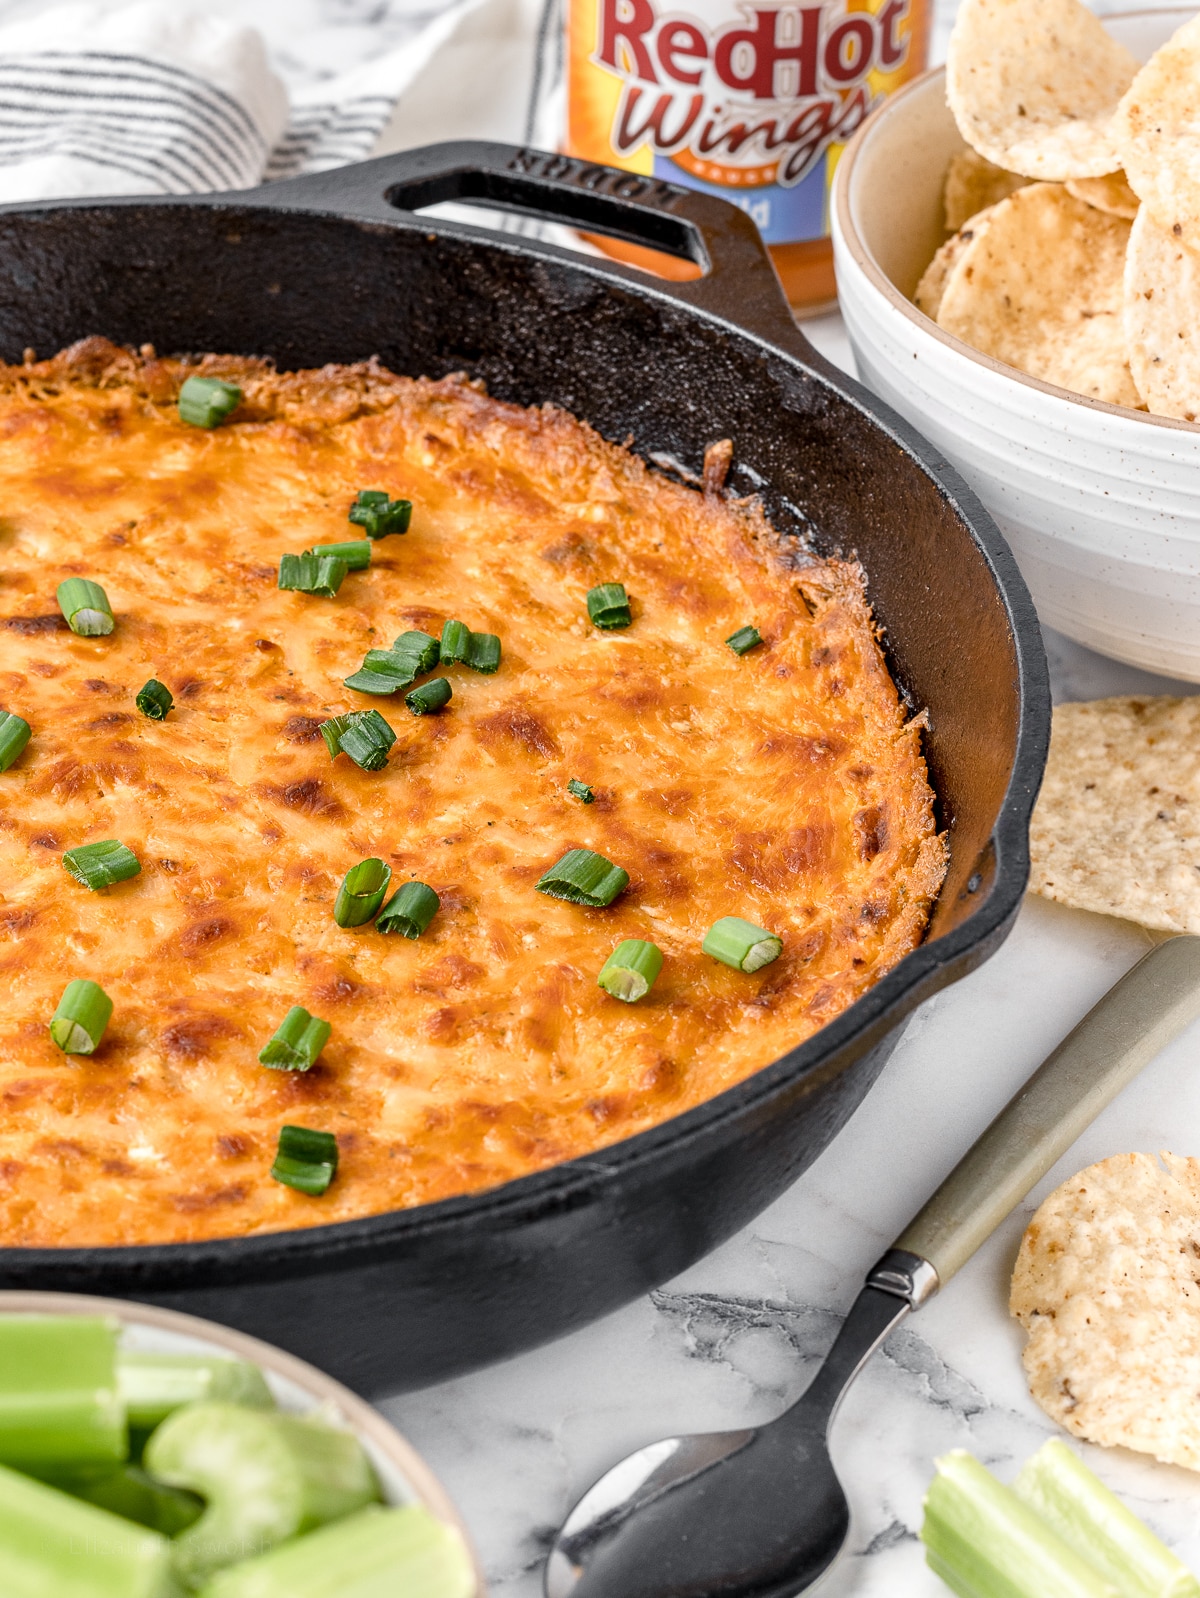 Smoked Buffalo Chicken Dip garnished with freshly chopped green onions. Celery, tortilla chips, and a spoon on the side for serving.